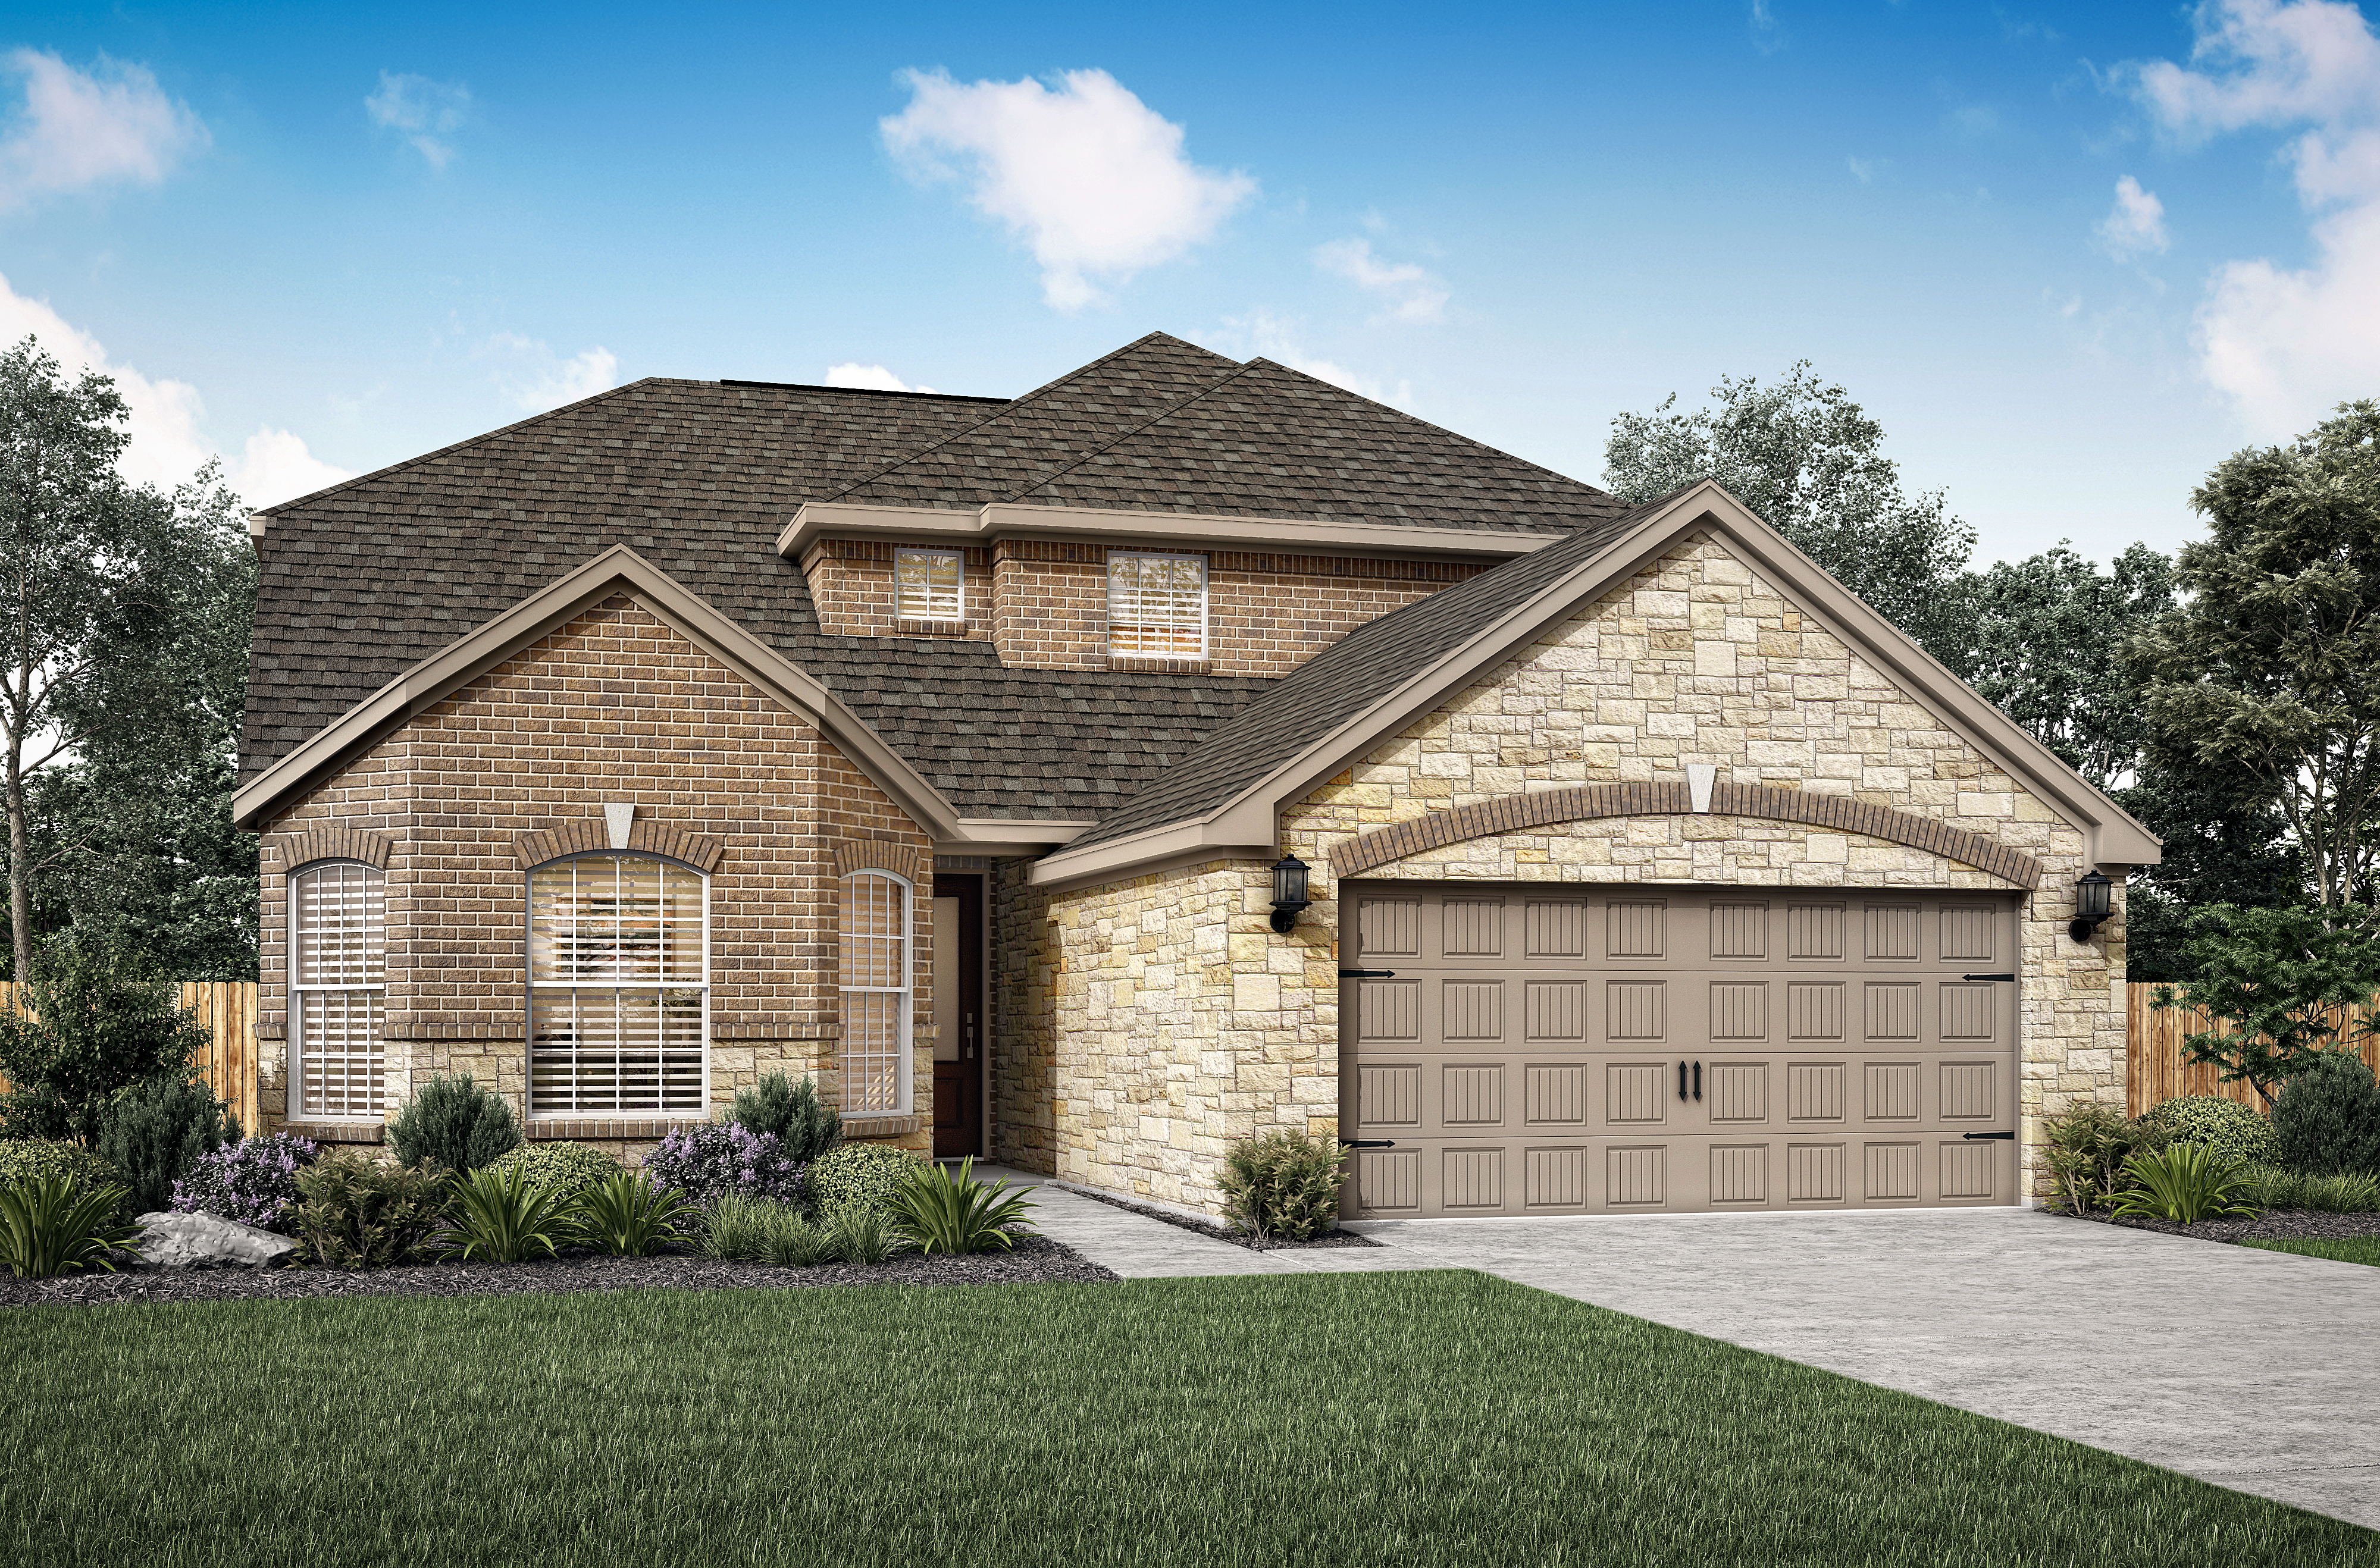 LGI Homes is now selling at Lago Mar in Texas City, a community of new, move-in ready homes with designer upgrades included.